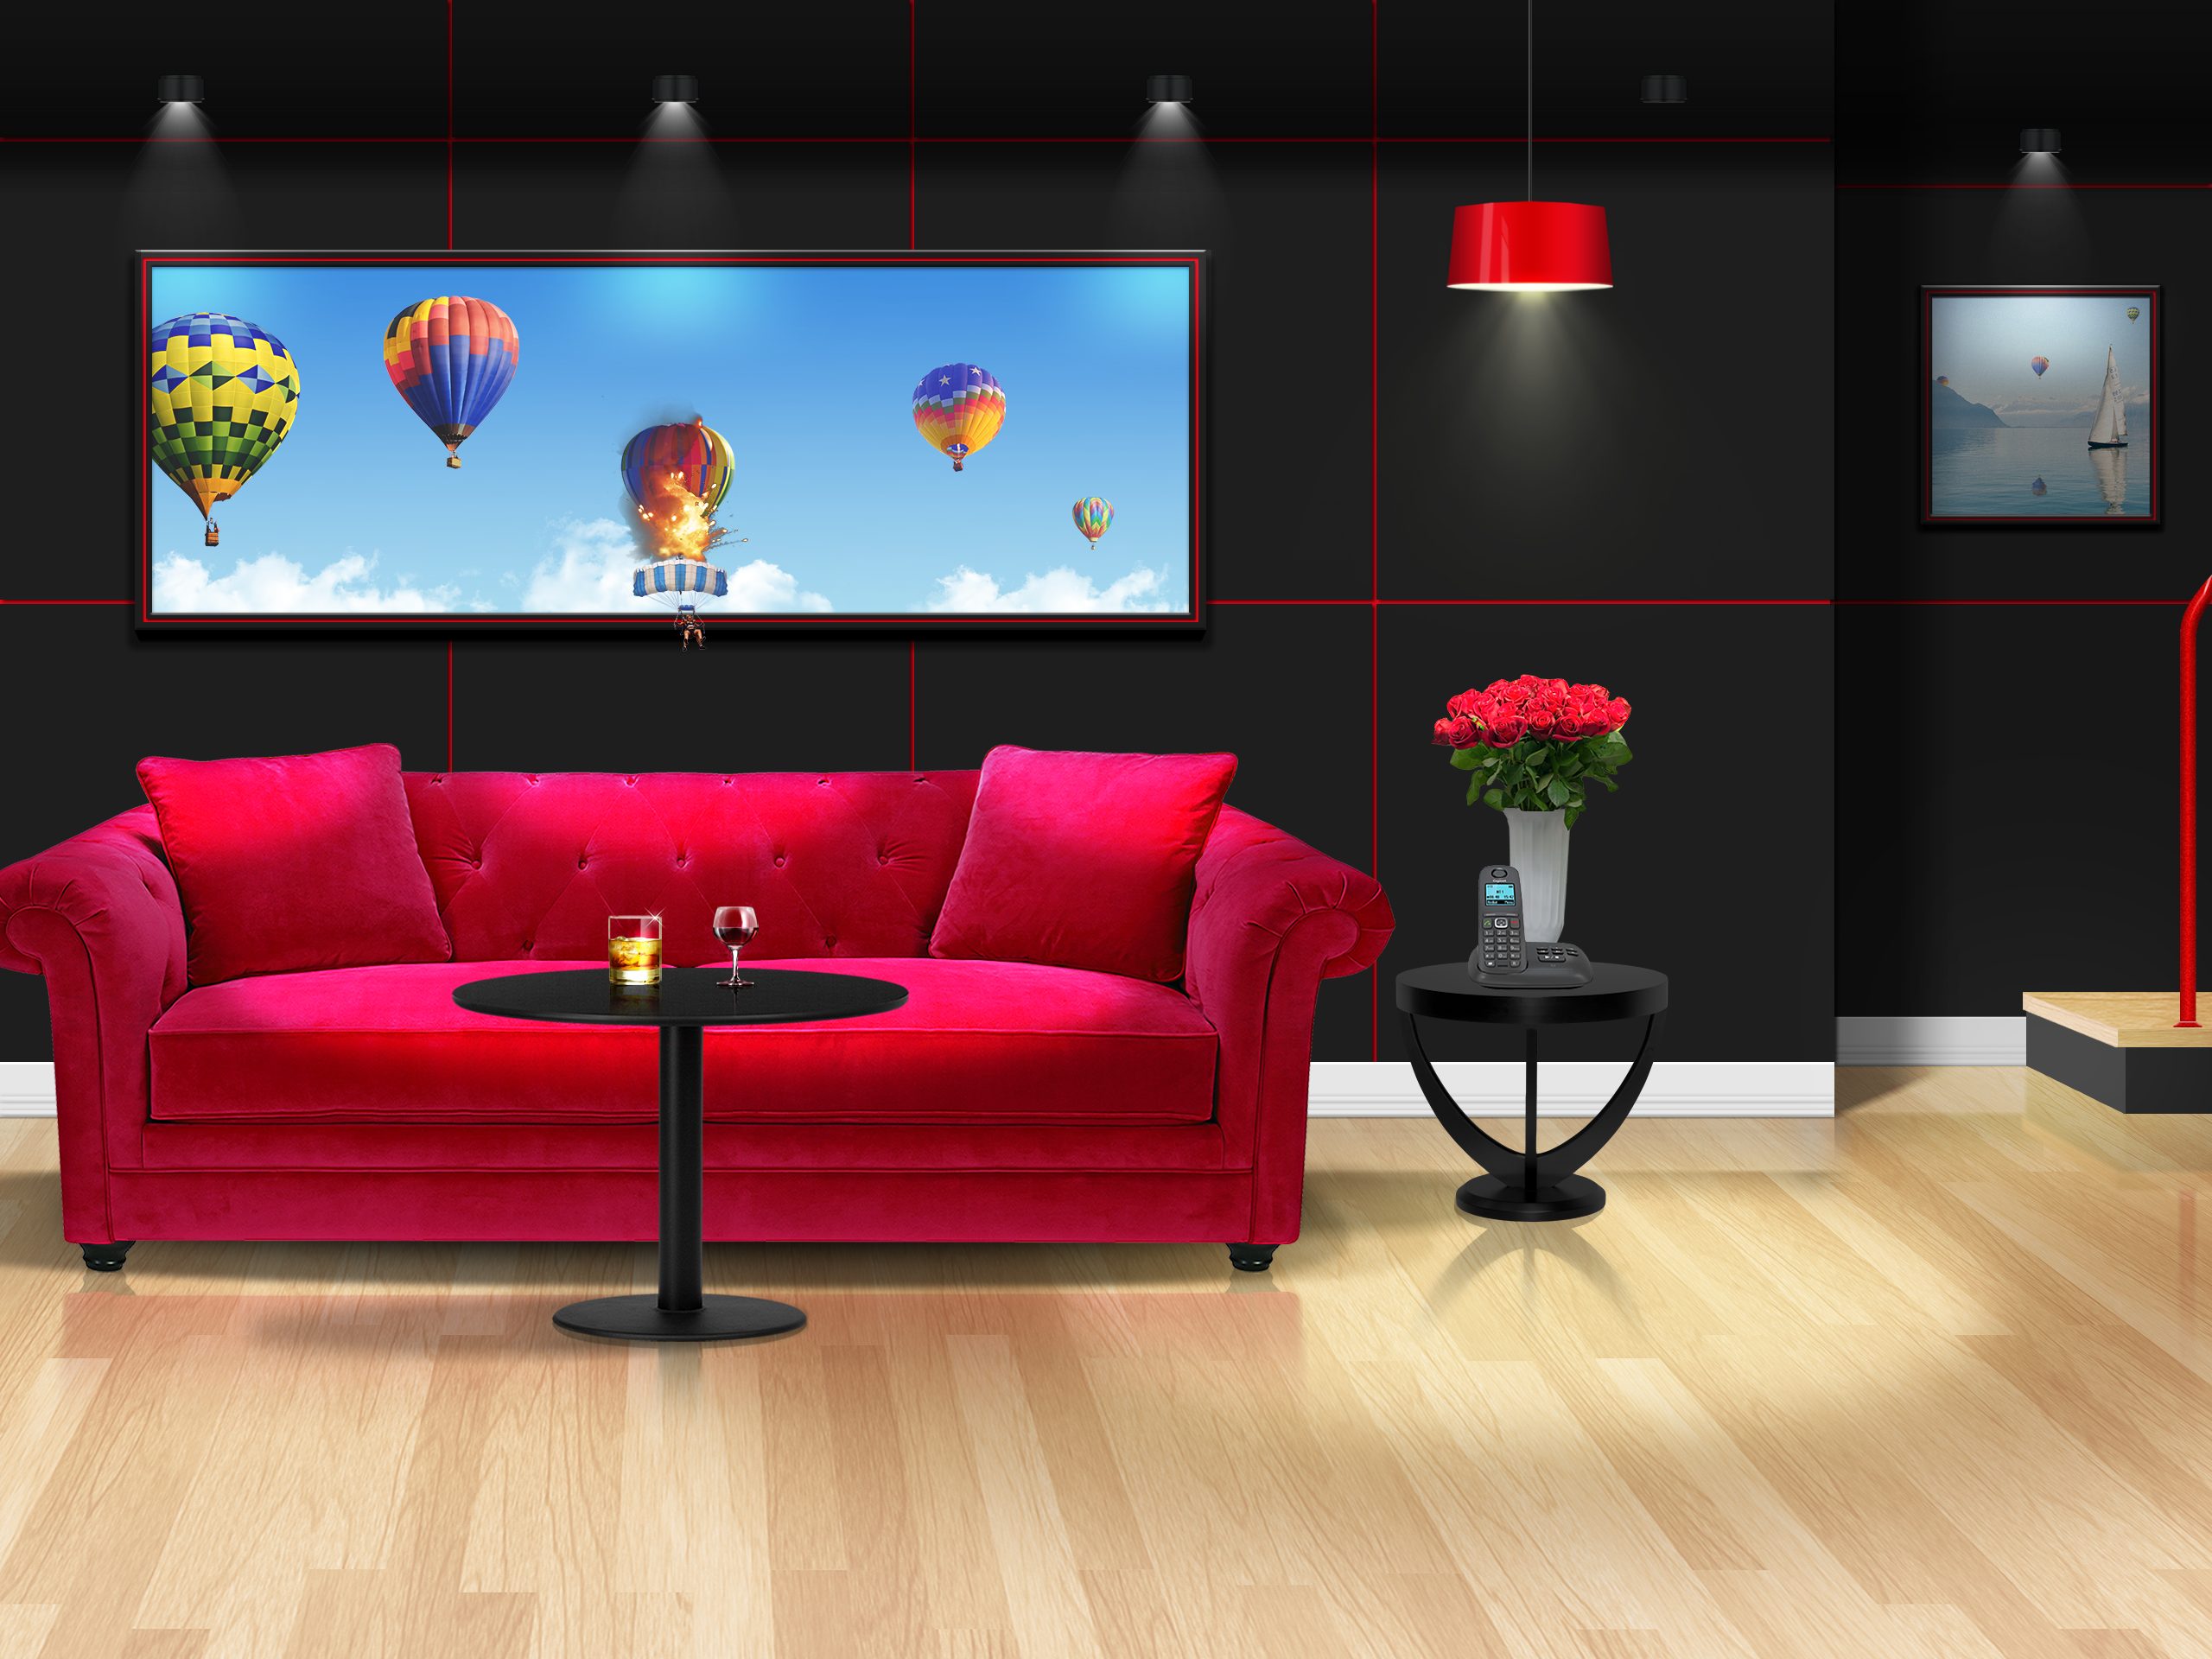 General 2560x1920 interior hot air balloons picture frames couch room table picture digital art